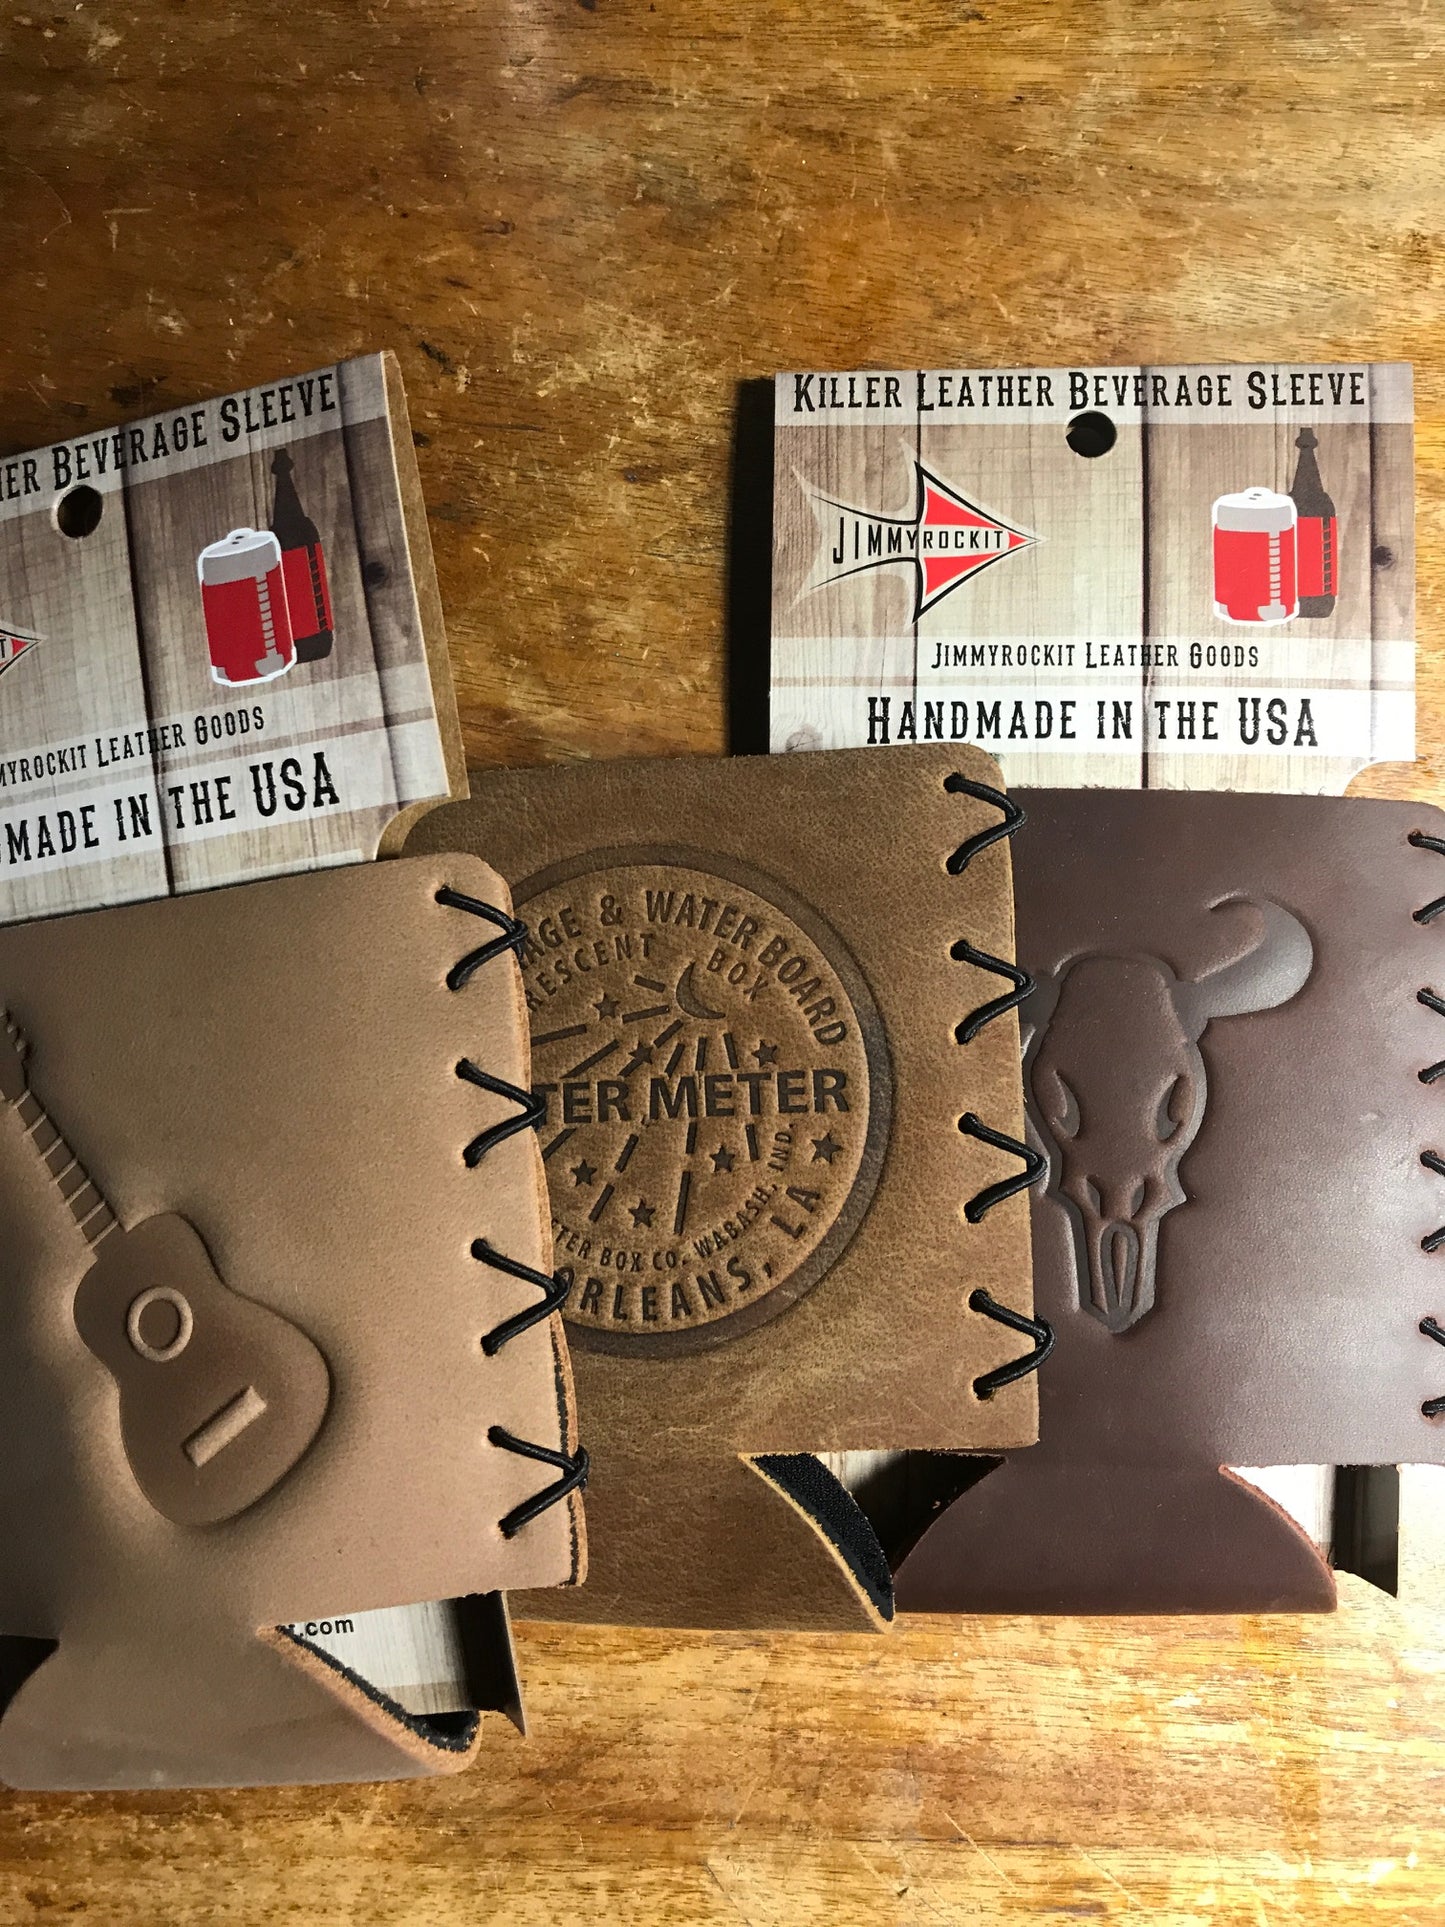 Leather Koozie - Queen of Fucking Everything